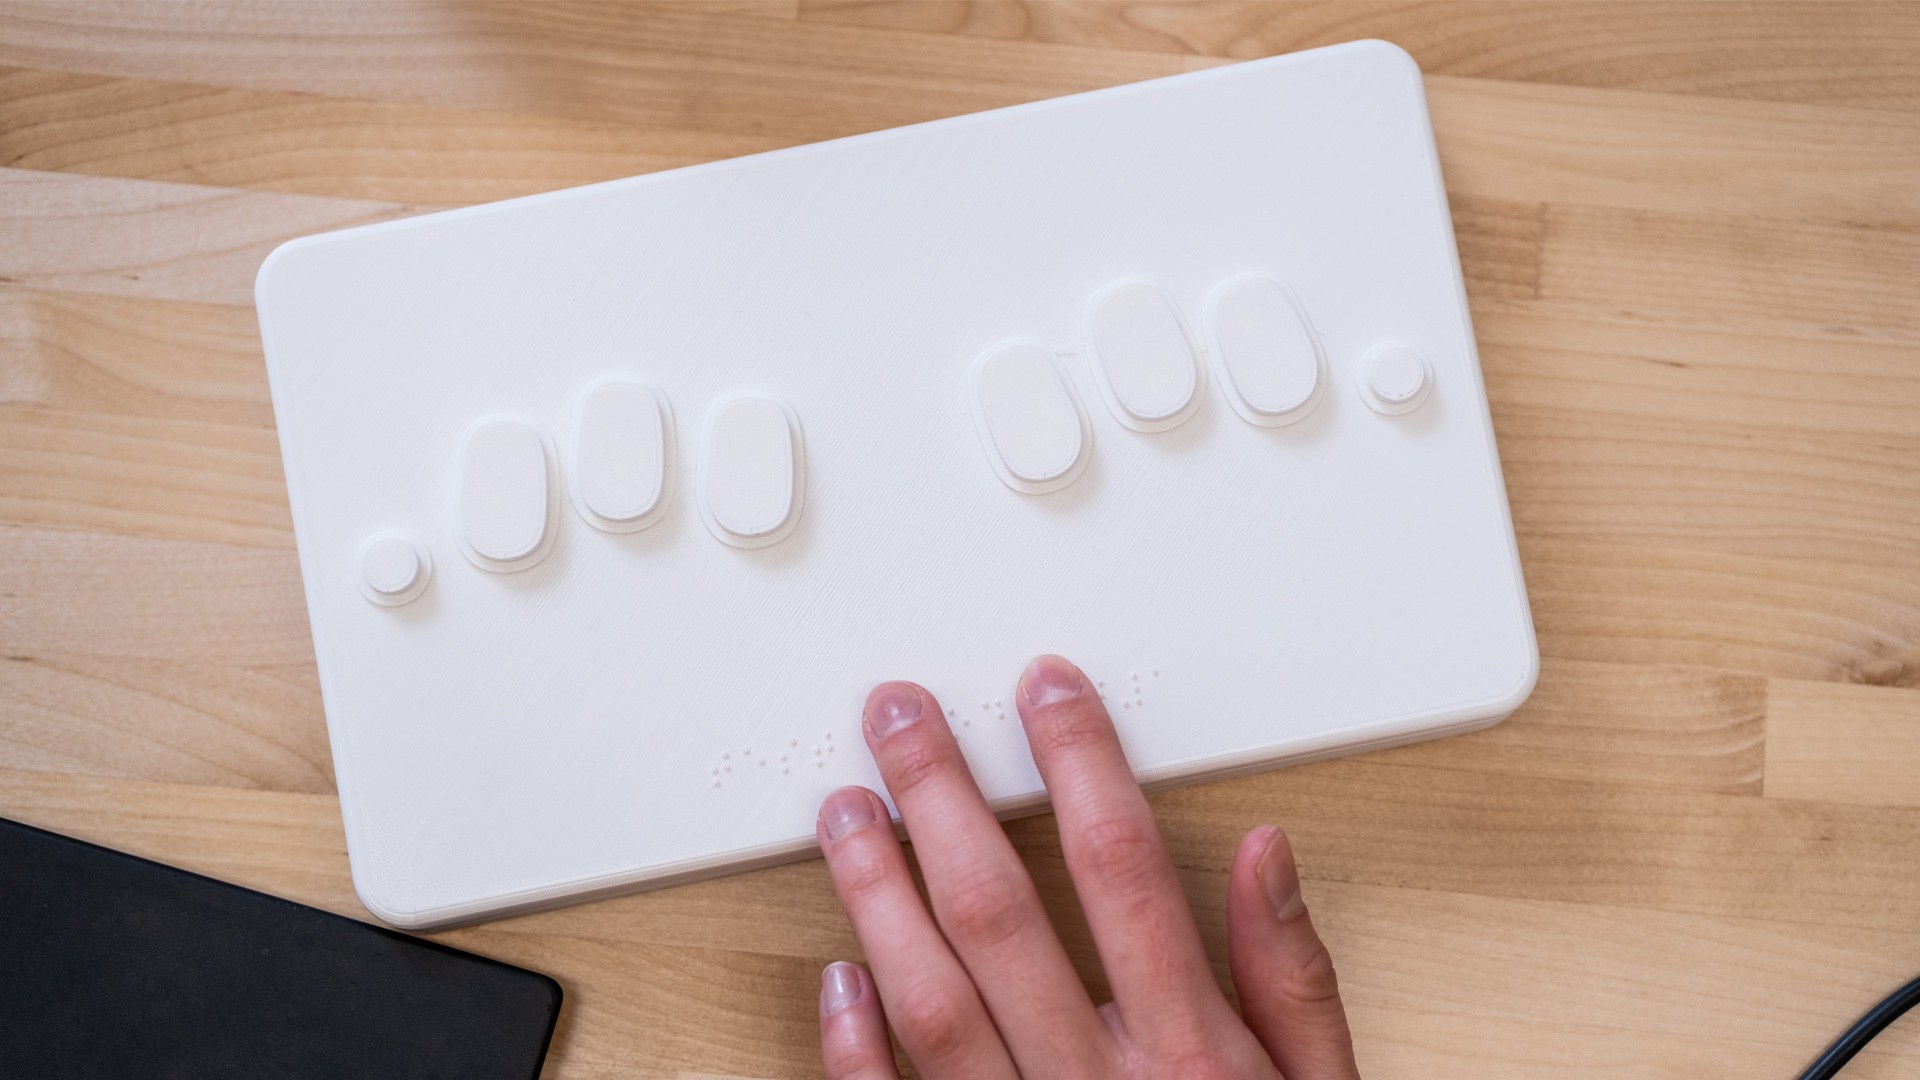 Hand using a braille keyboard